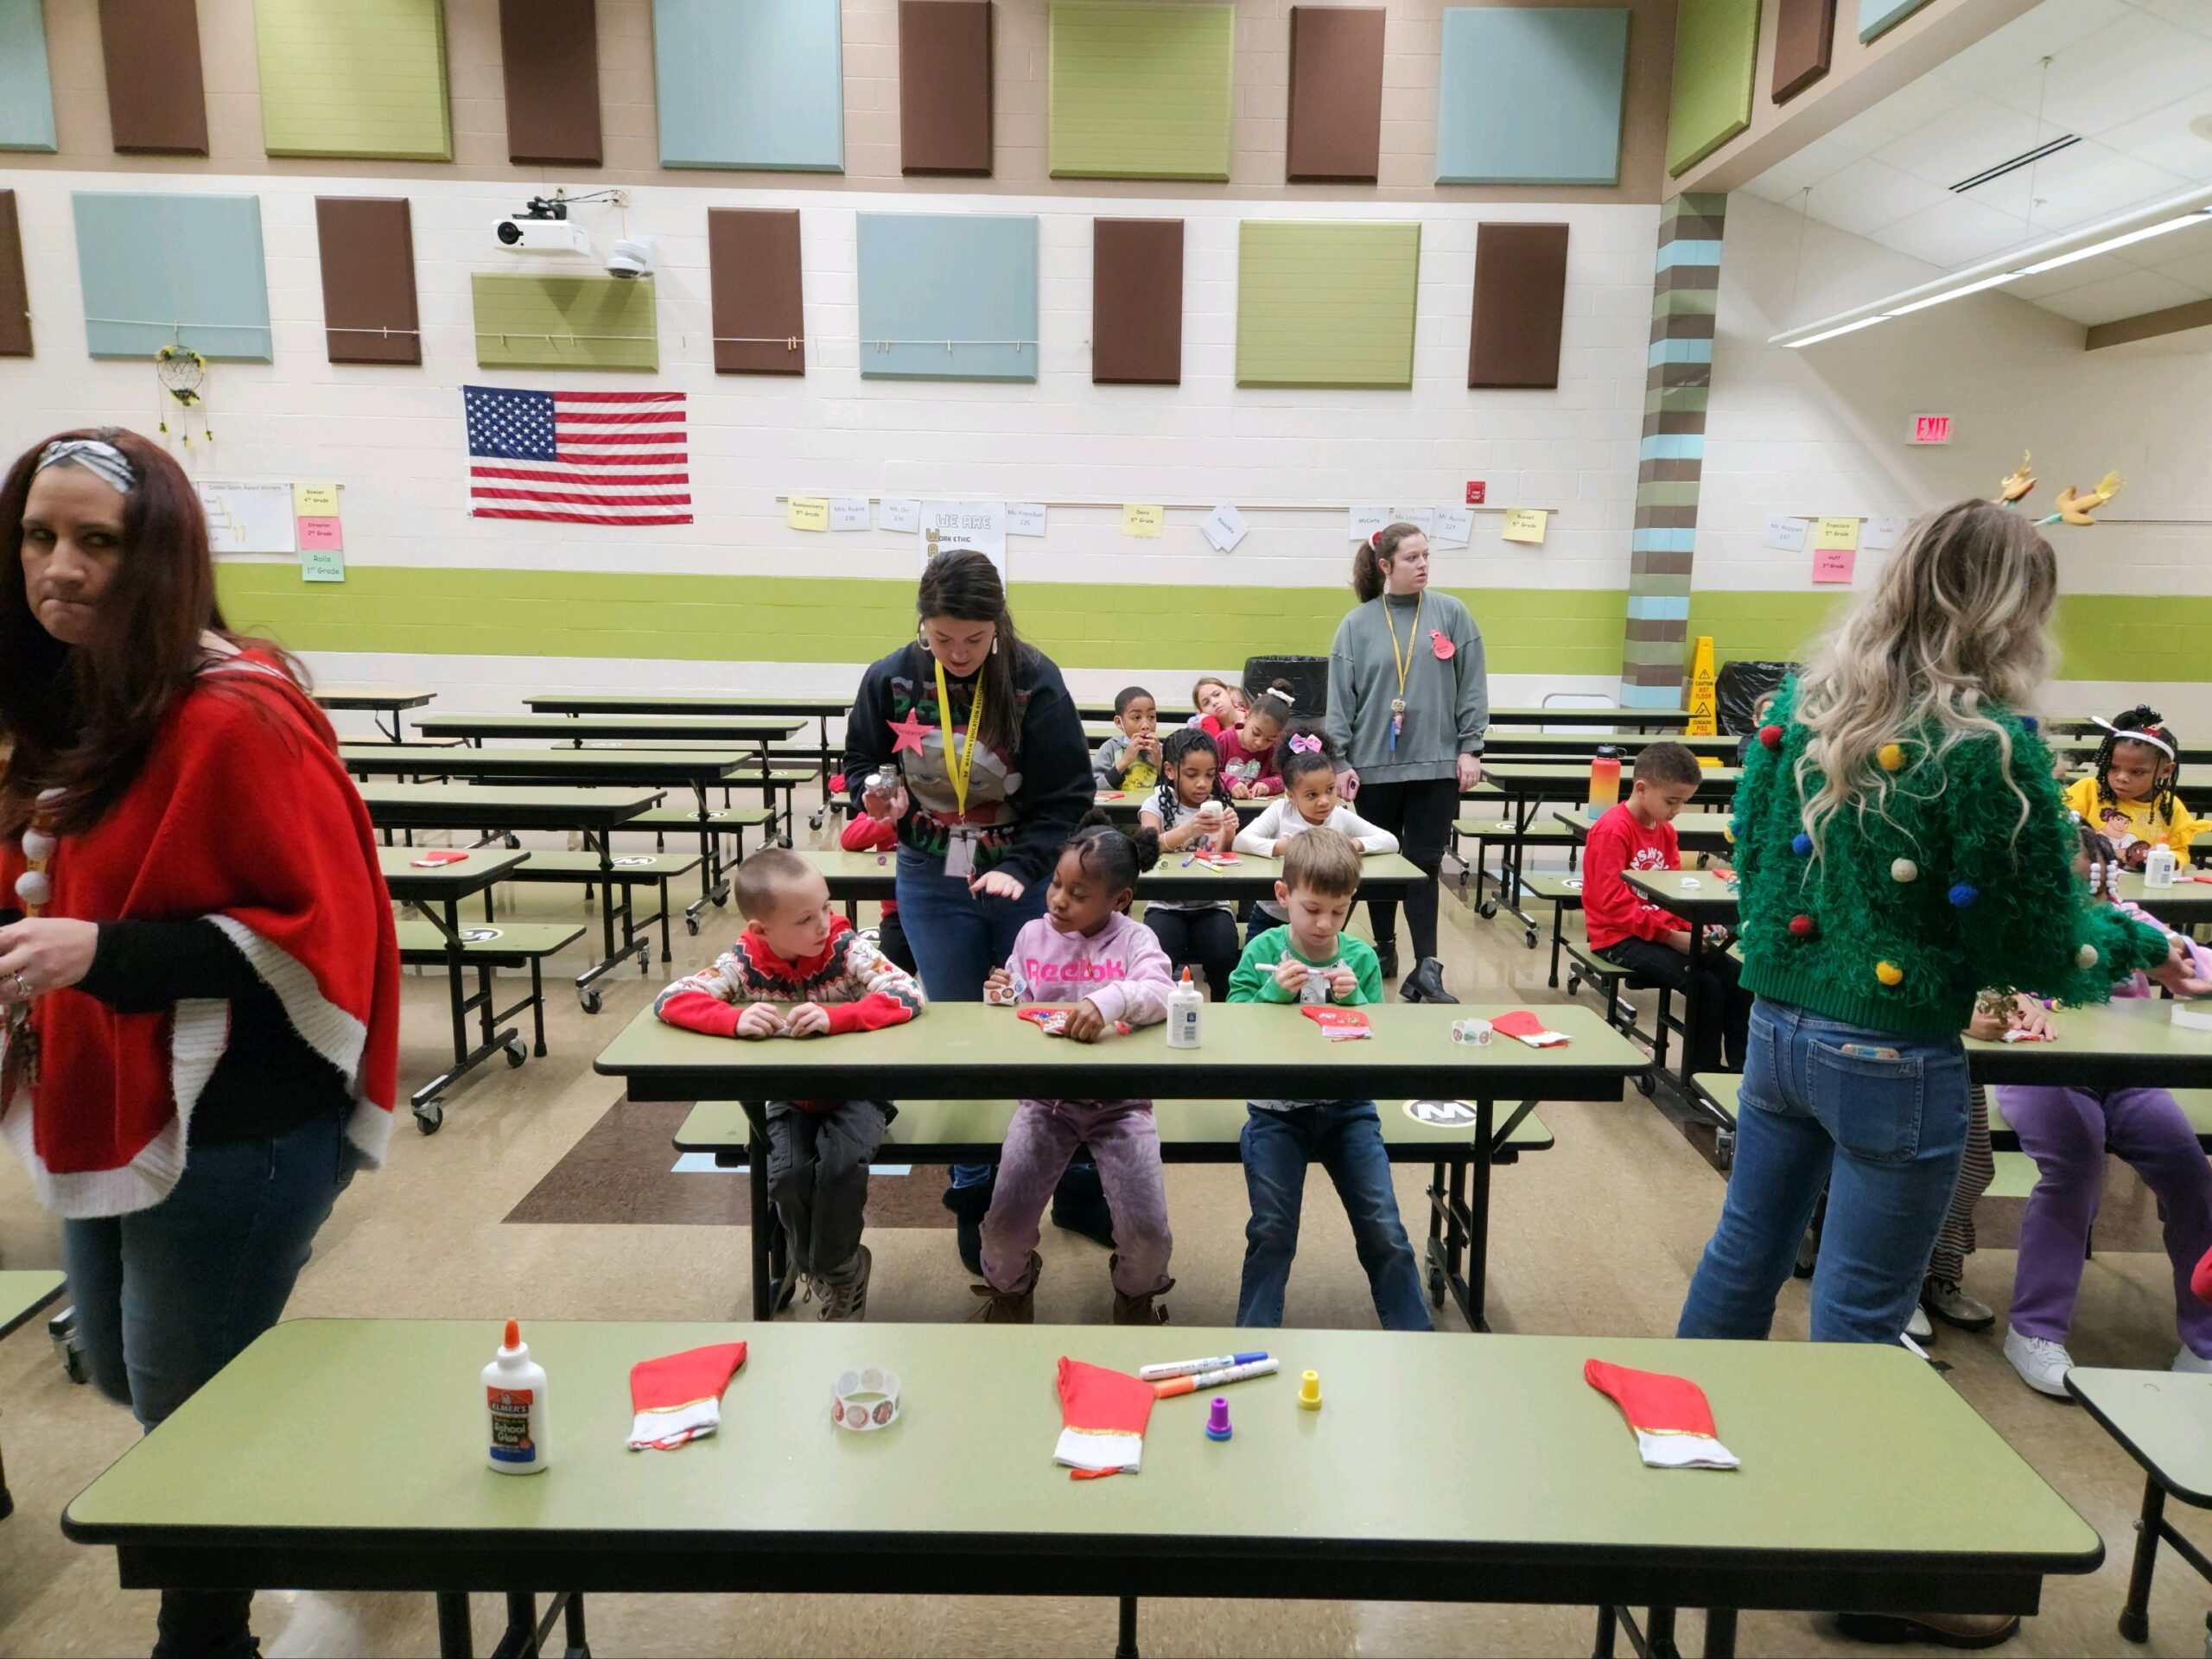 PBIS Incentive was Tuesday, December 20, 2022